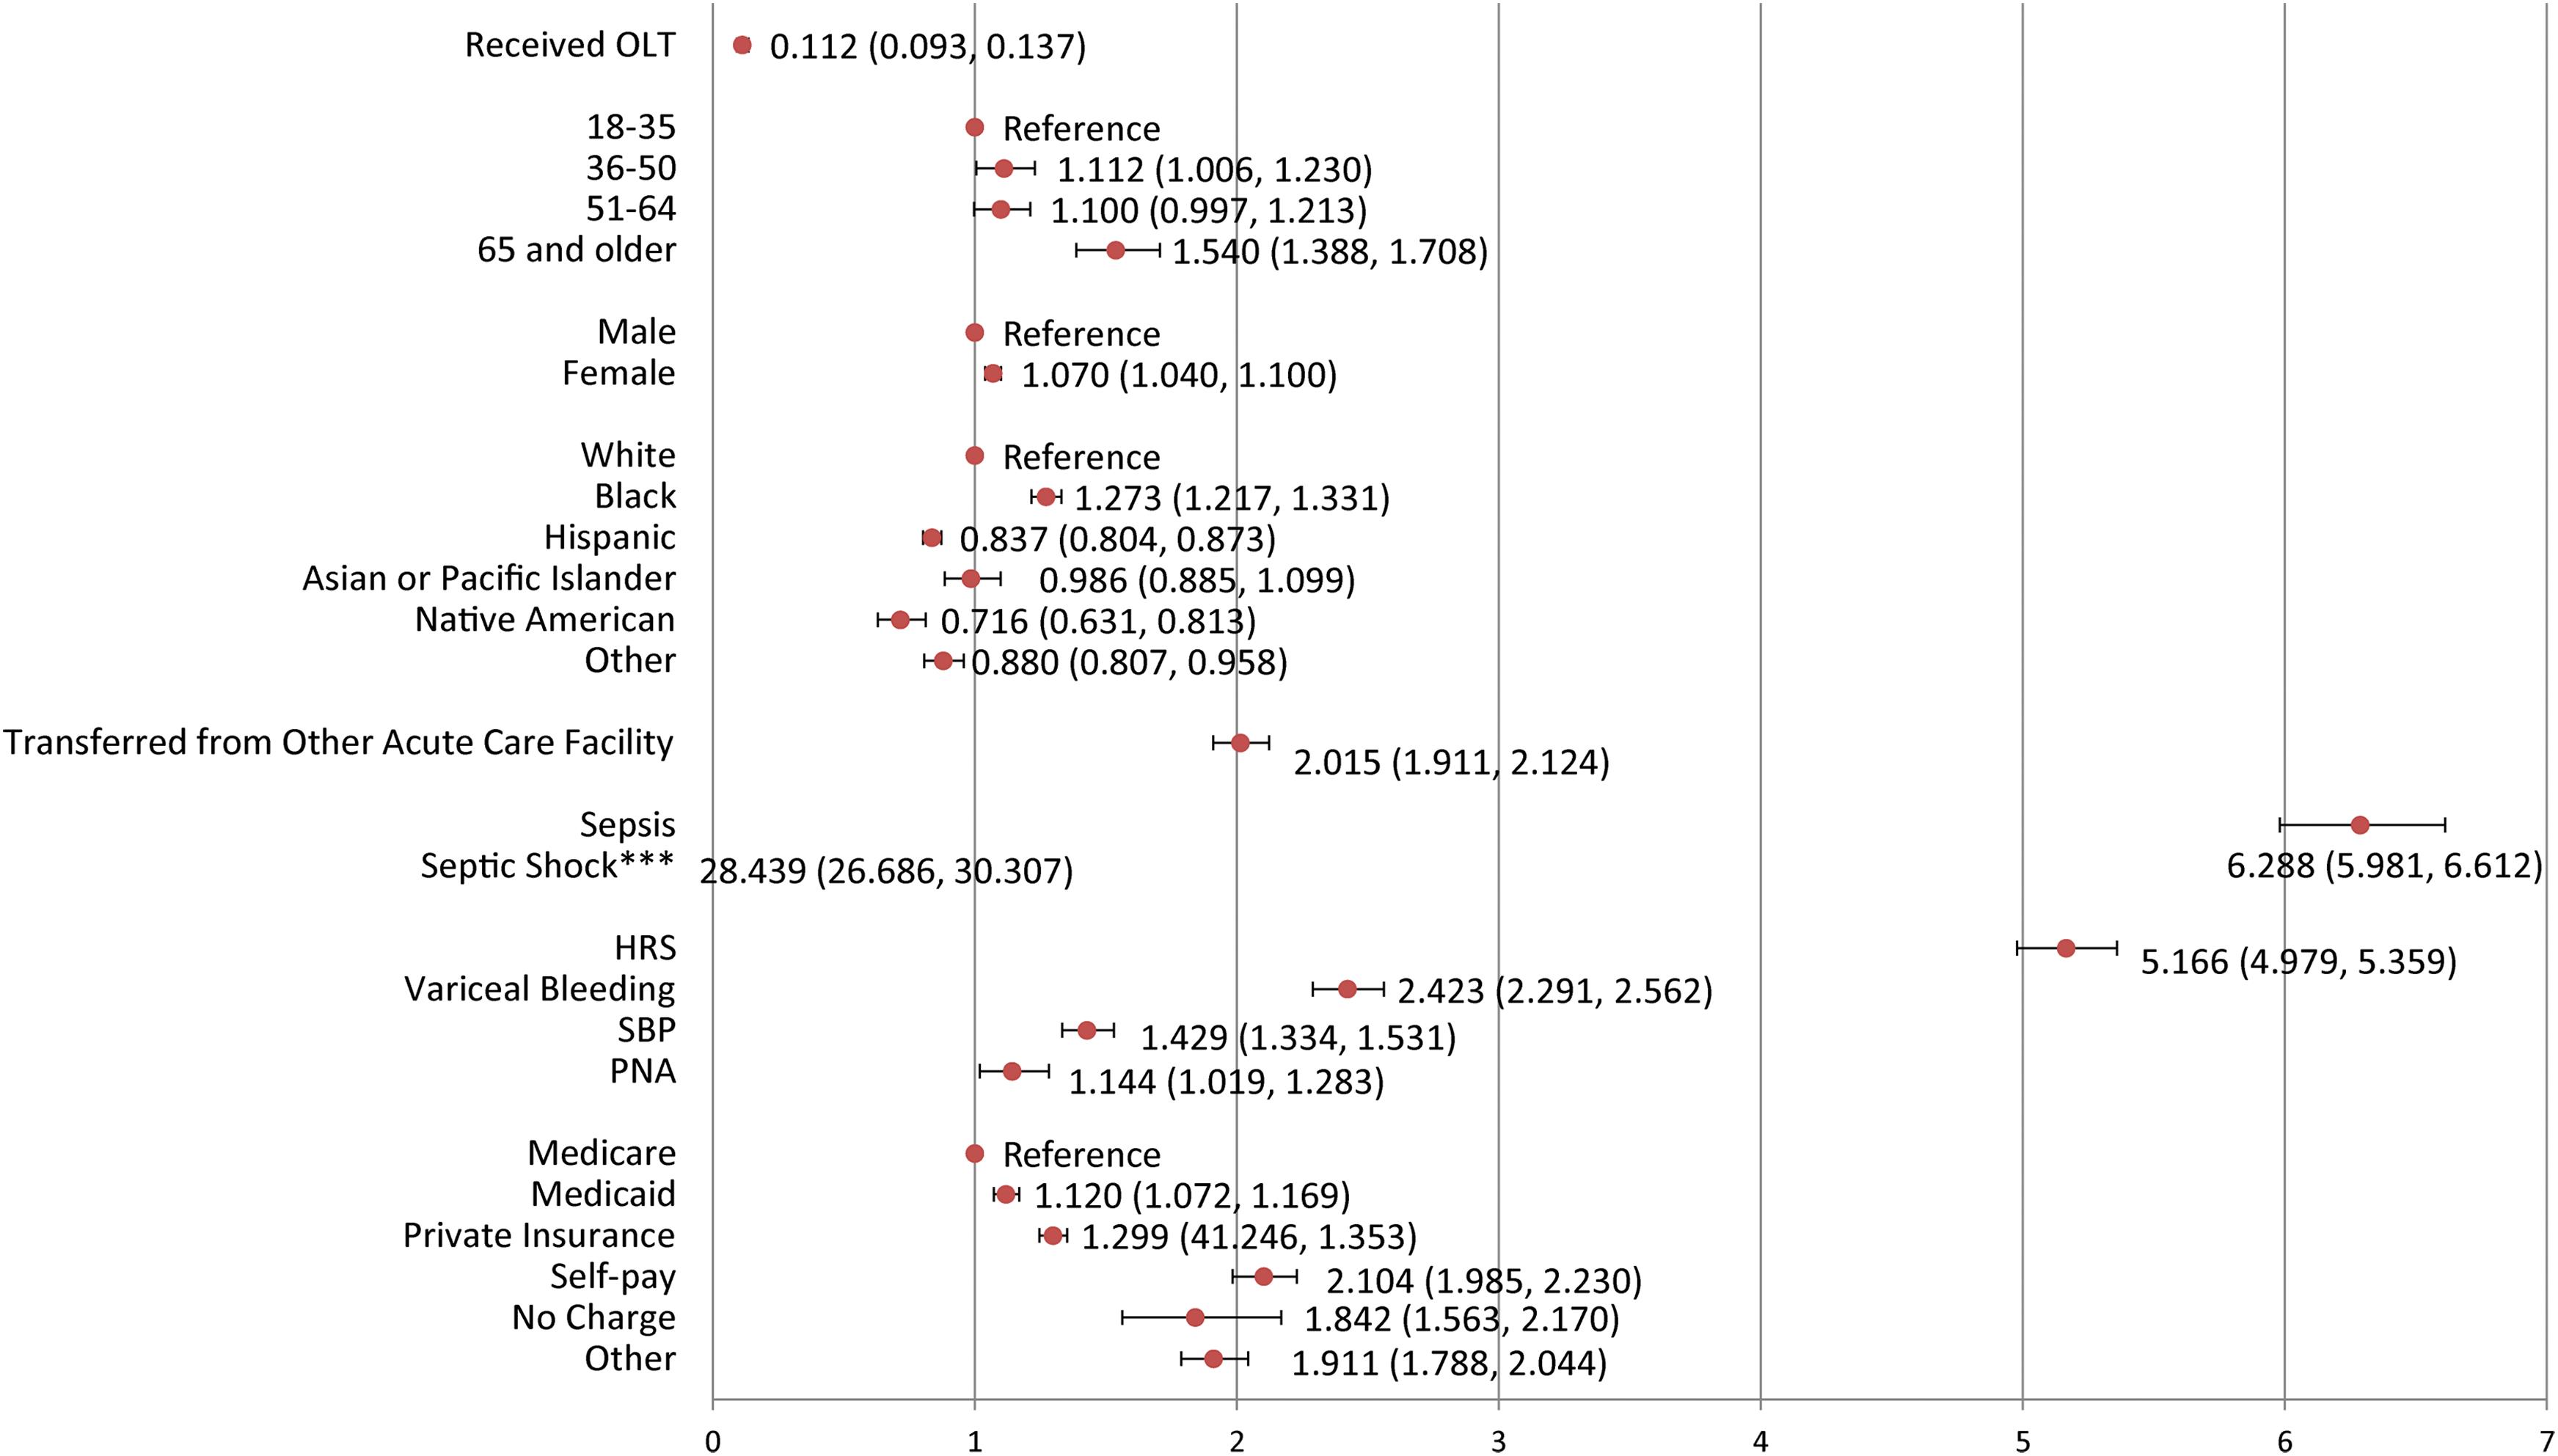 Adjusted mortality risk ratios related to patient characteristics.